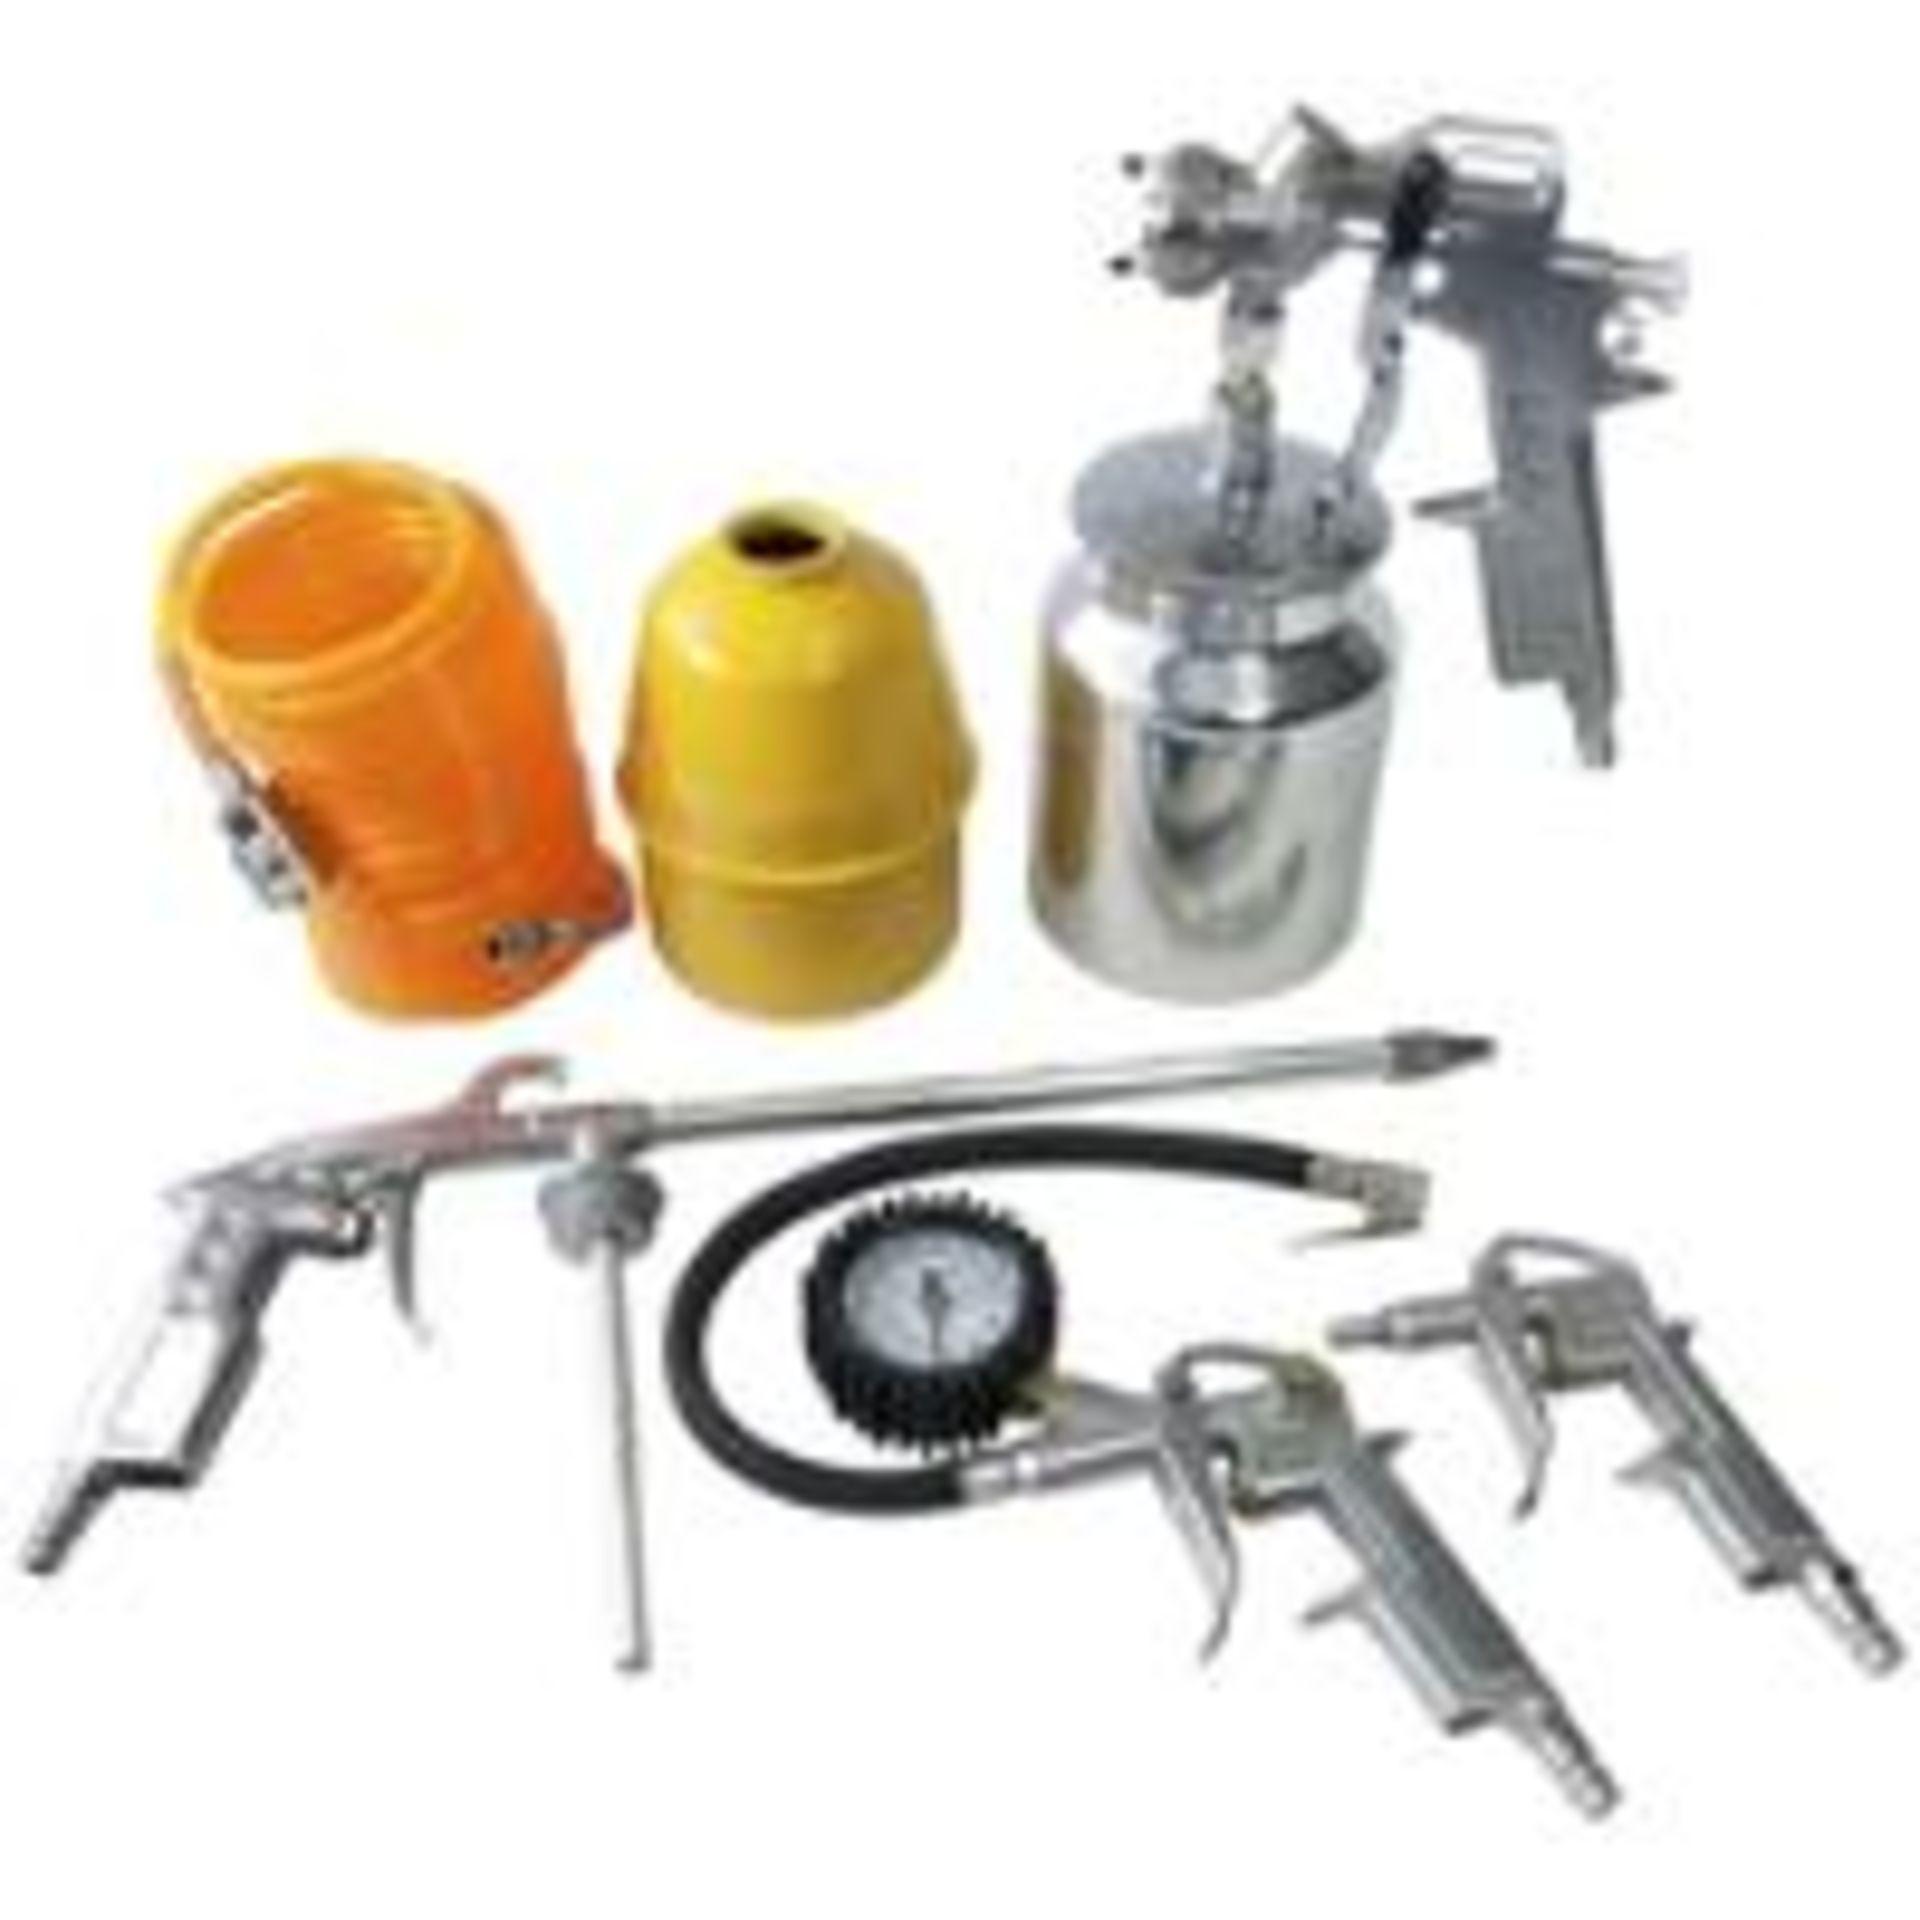 V Brand New 5 Piece Air Tool Kit Inc Air Sprayer X 2 YOUR BID PRICE TO BE MULTIPLIED BY TWO